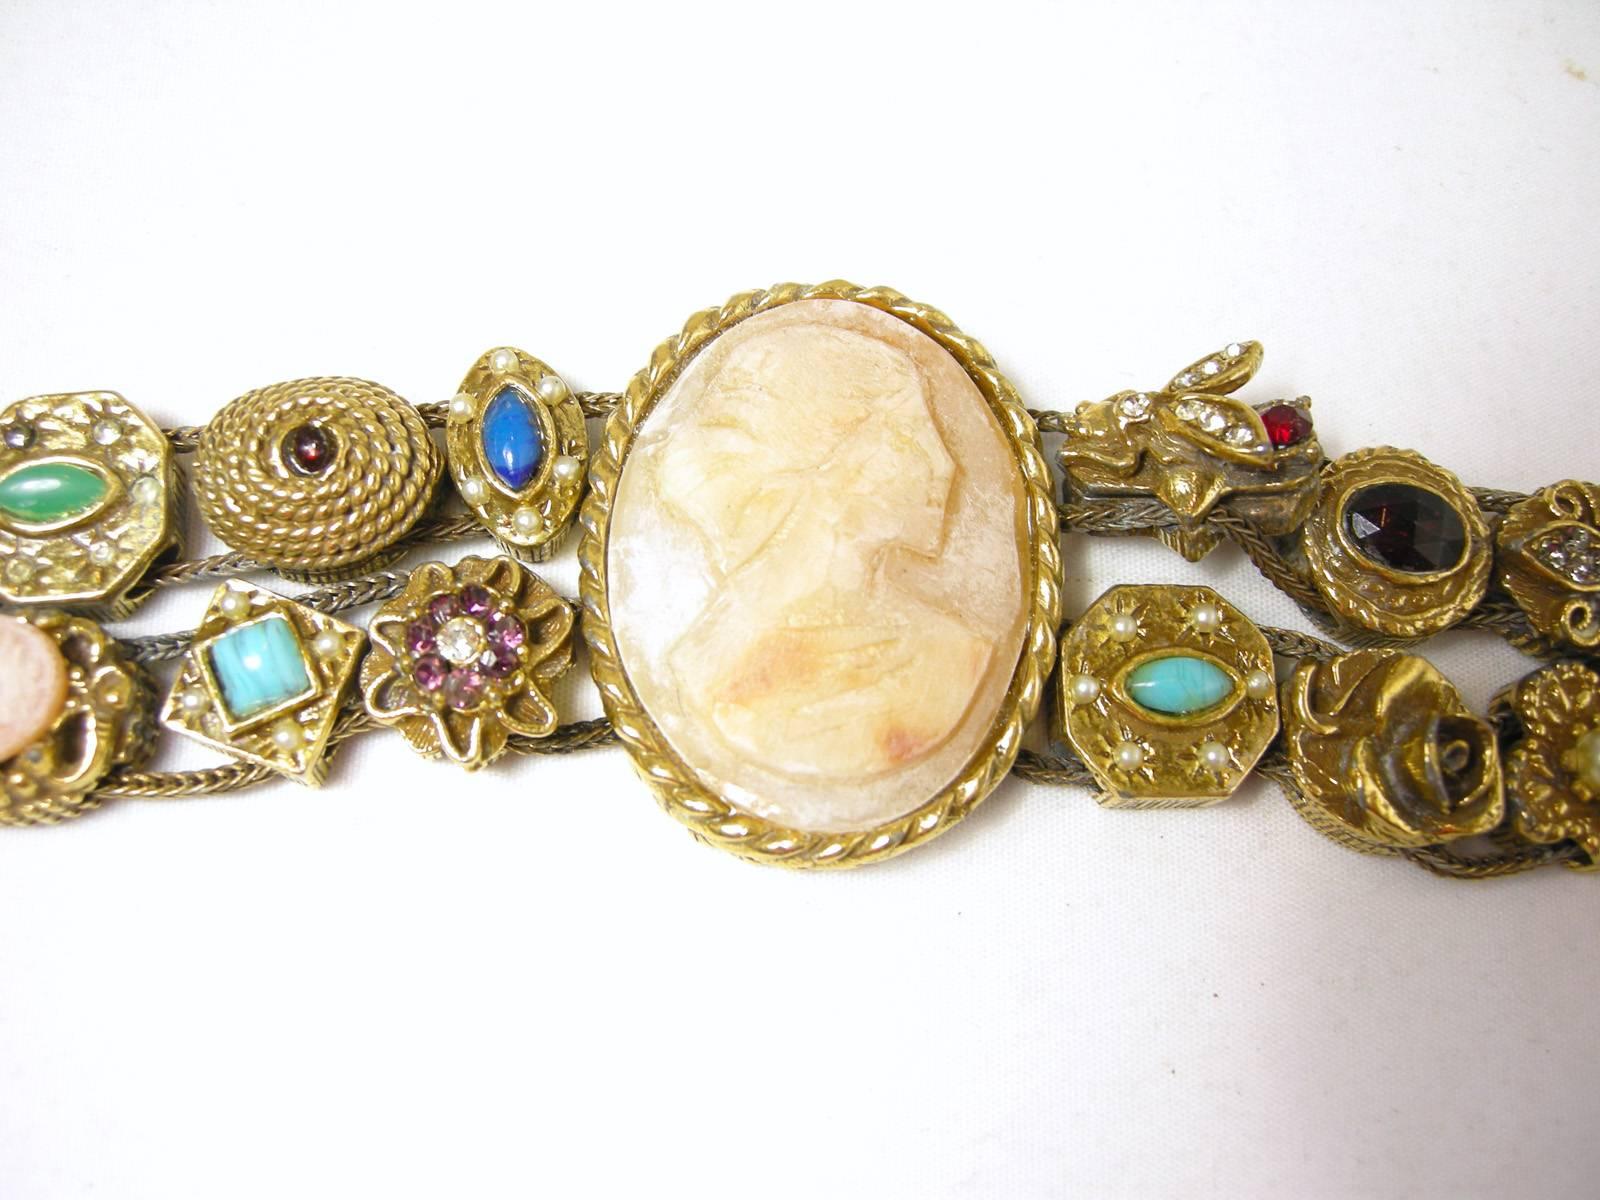 It is so rare to find a Goldette slide bracelet, but here it is. It has double strands of metal ropes that is intricately detailed and features many different types of colorful charms leading to the center cameo. It is set in a gold tone setting and